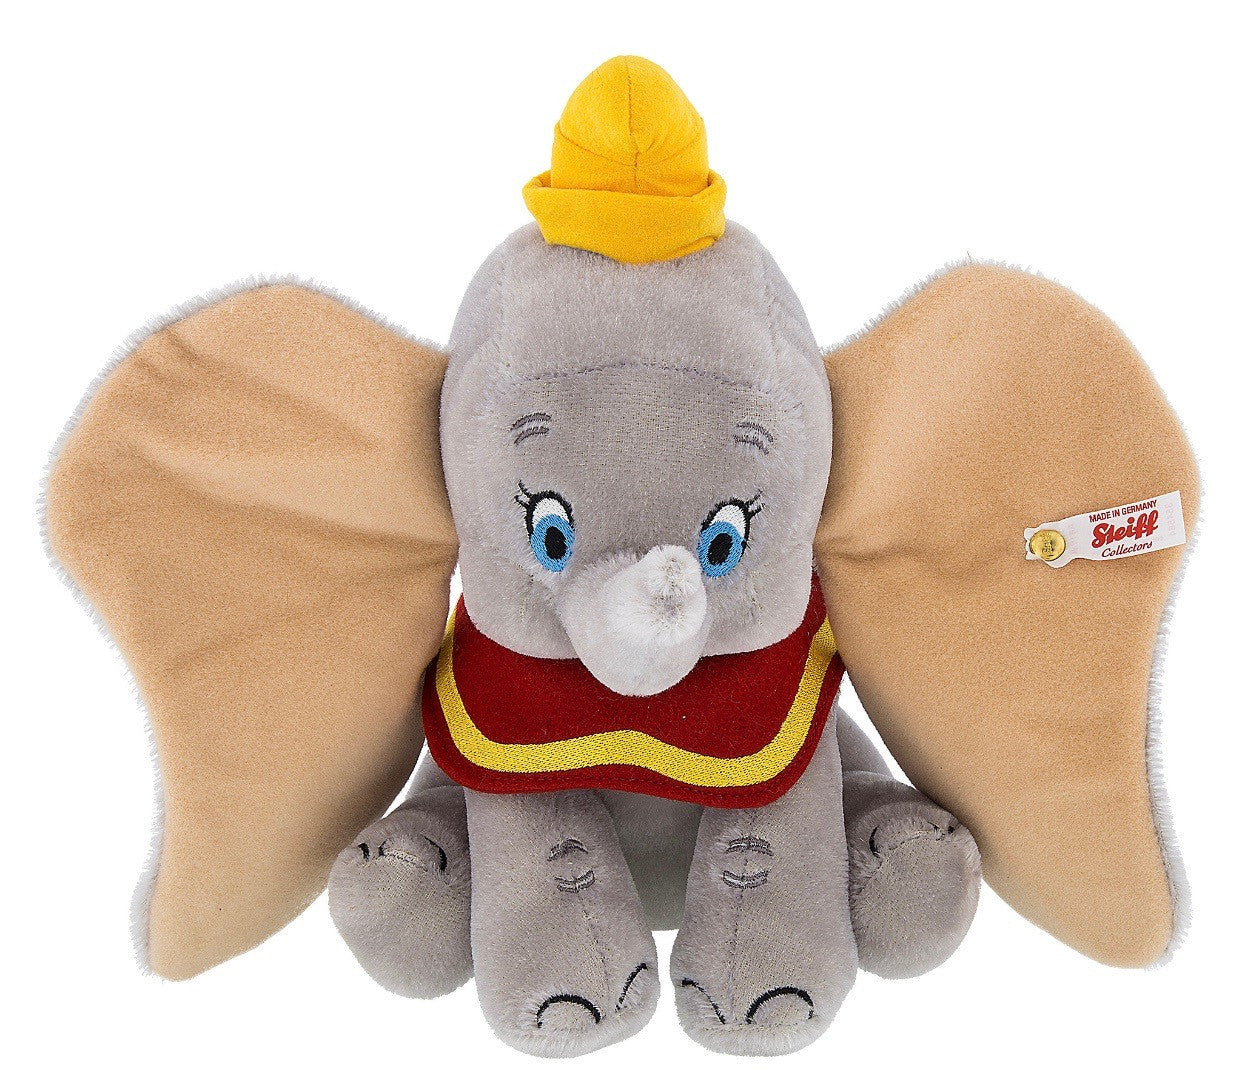 Disney Parks Dumbo Mohair Limited Plush by Steiff New with Box